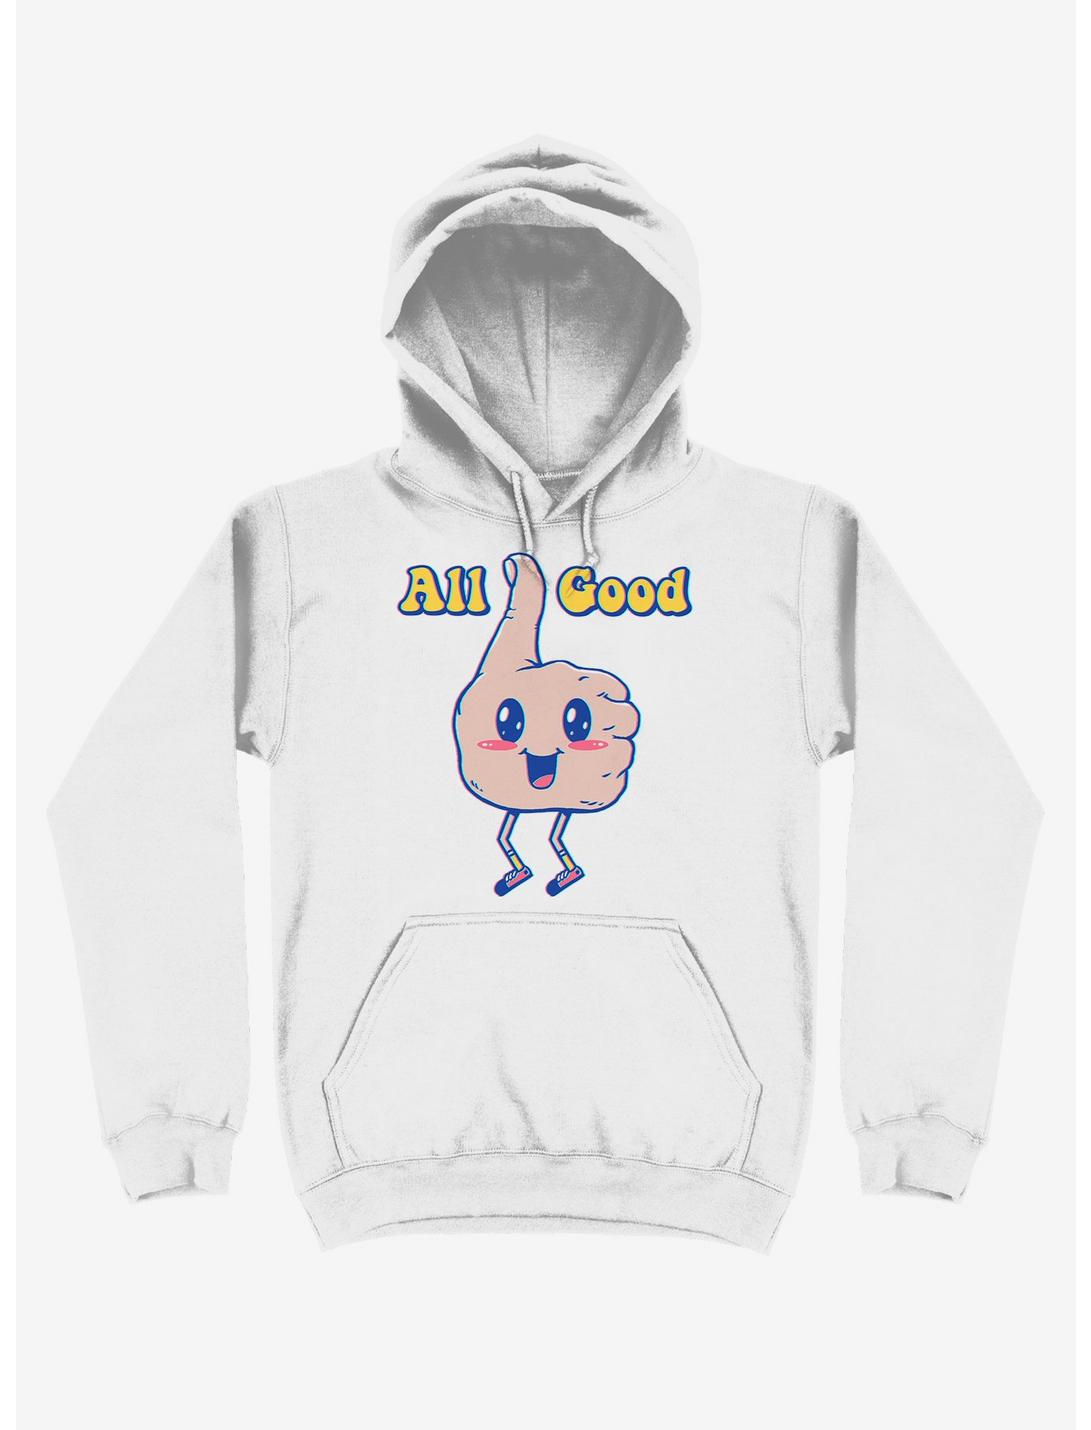 It's All Good Thumbs Up White Hoodie, WHITE, hi-res